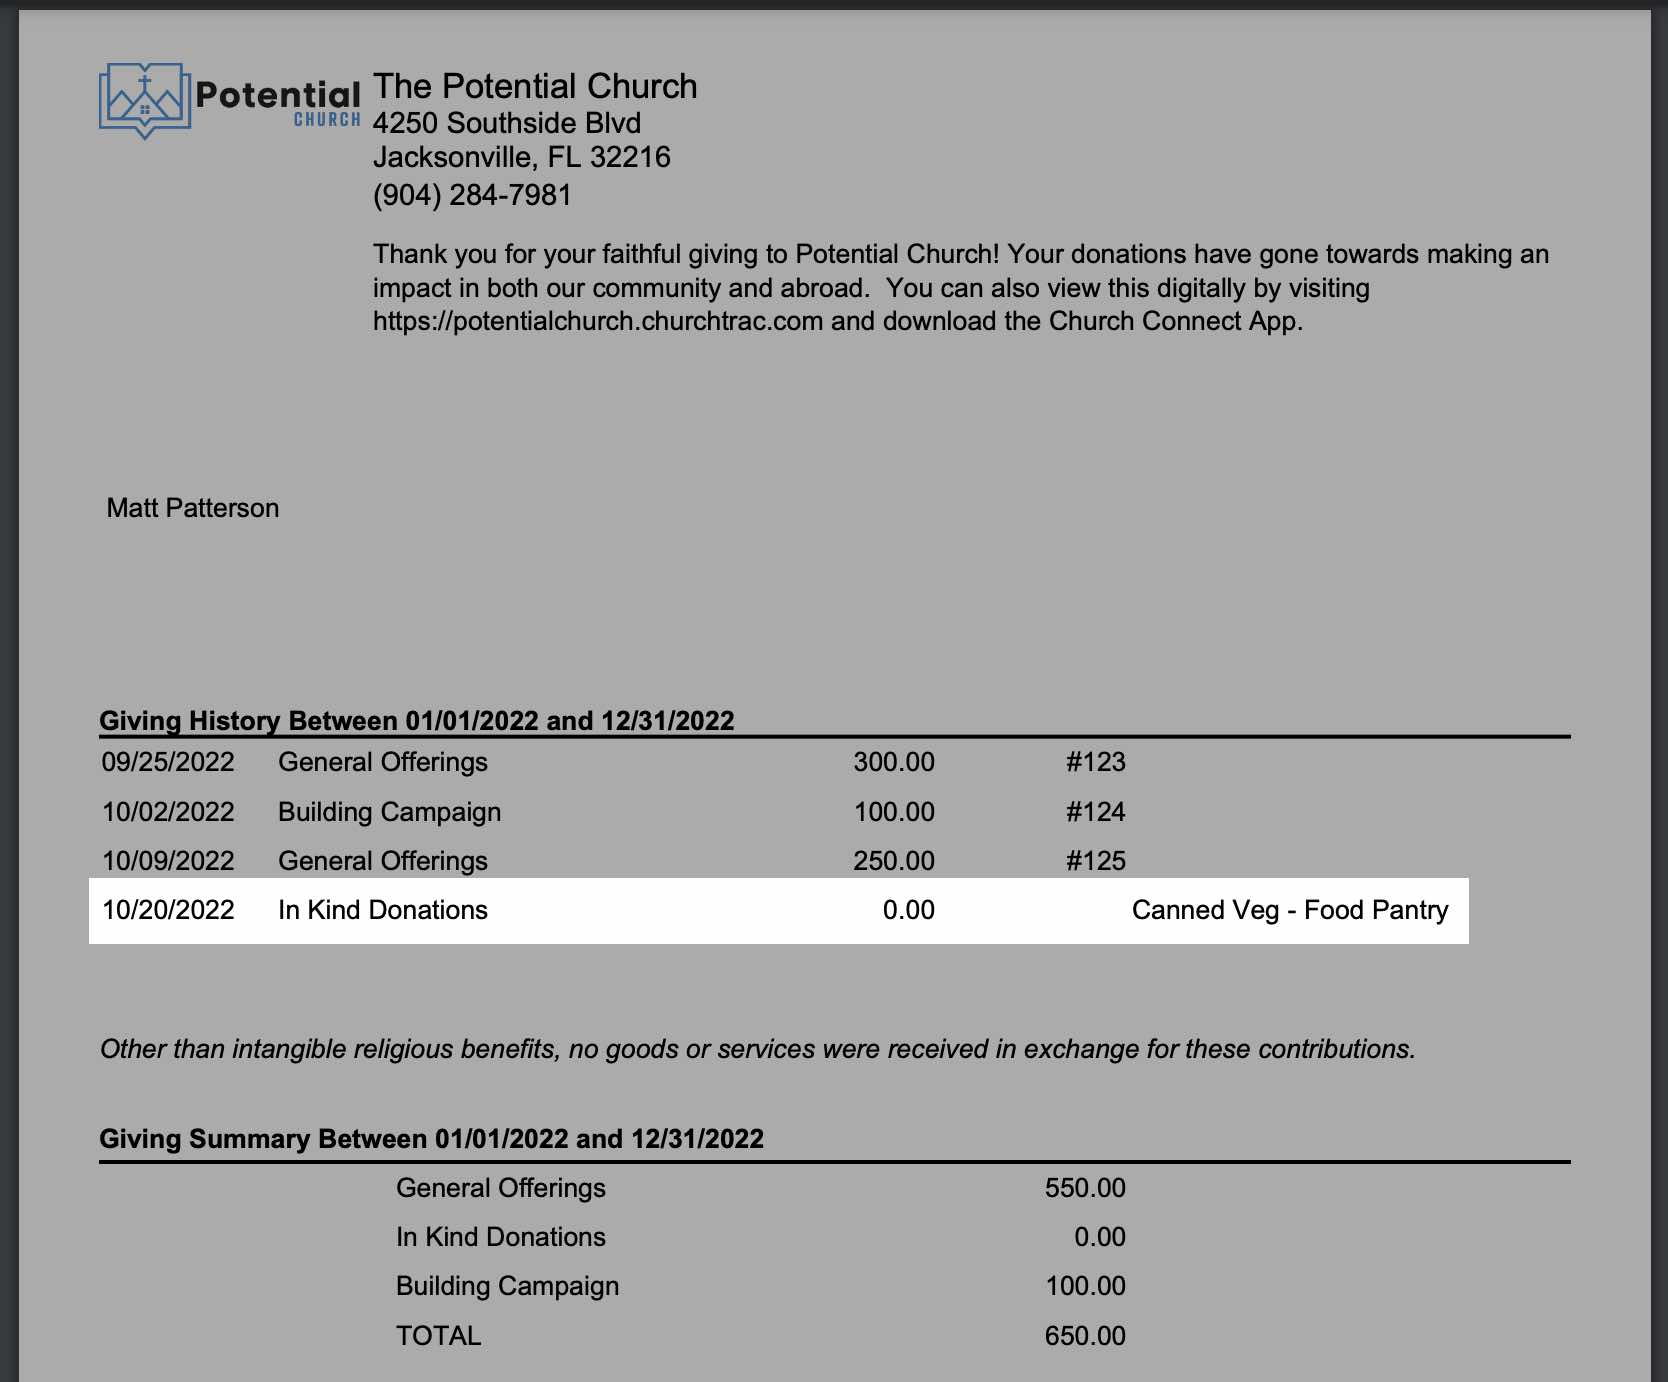 A church giving statement showing the in-kind donation with a zero dollar amount for its value